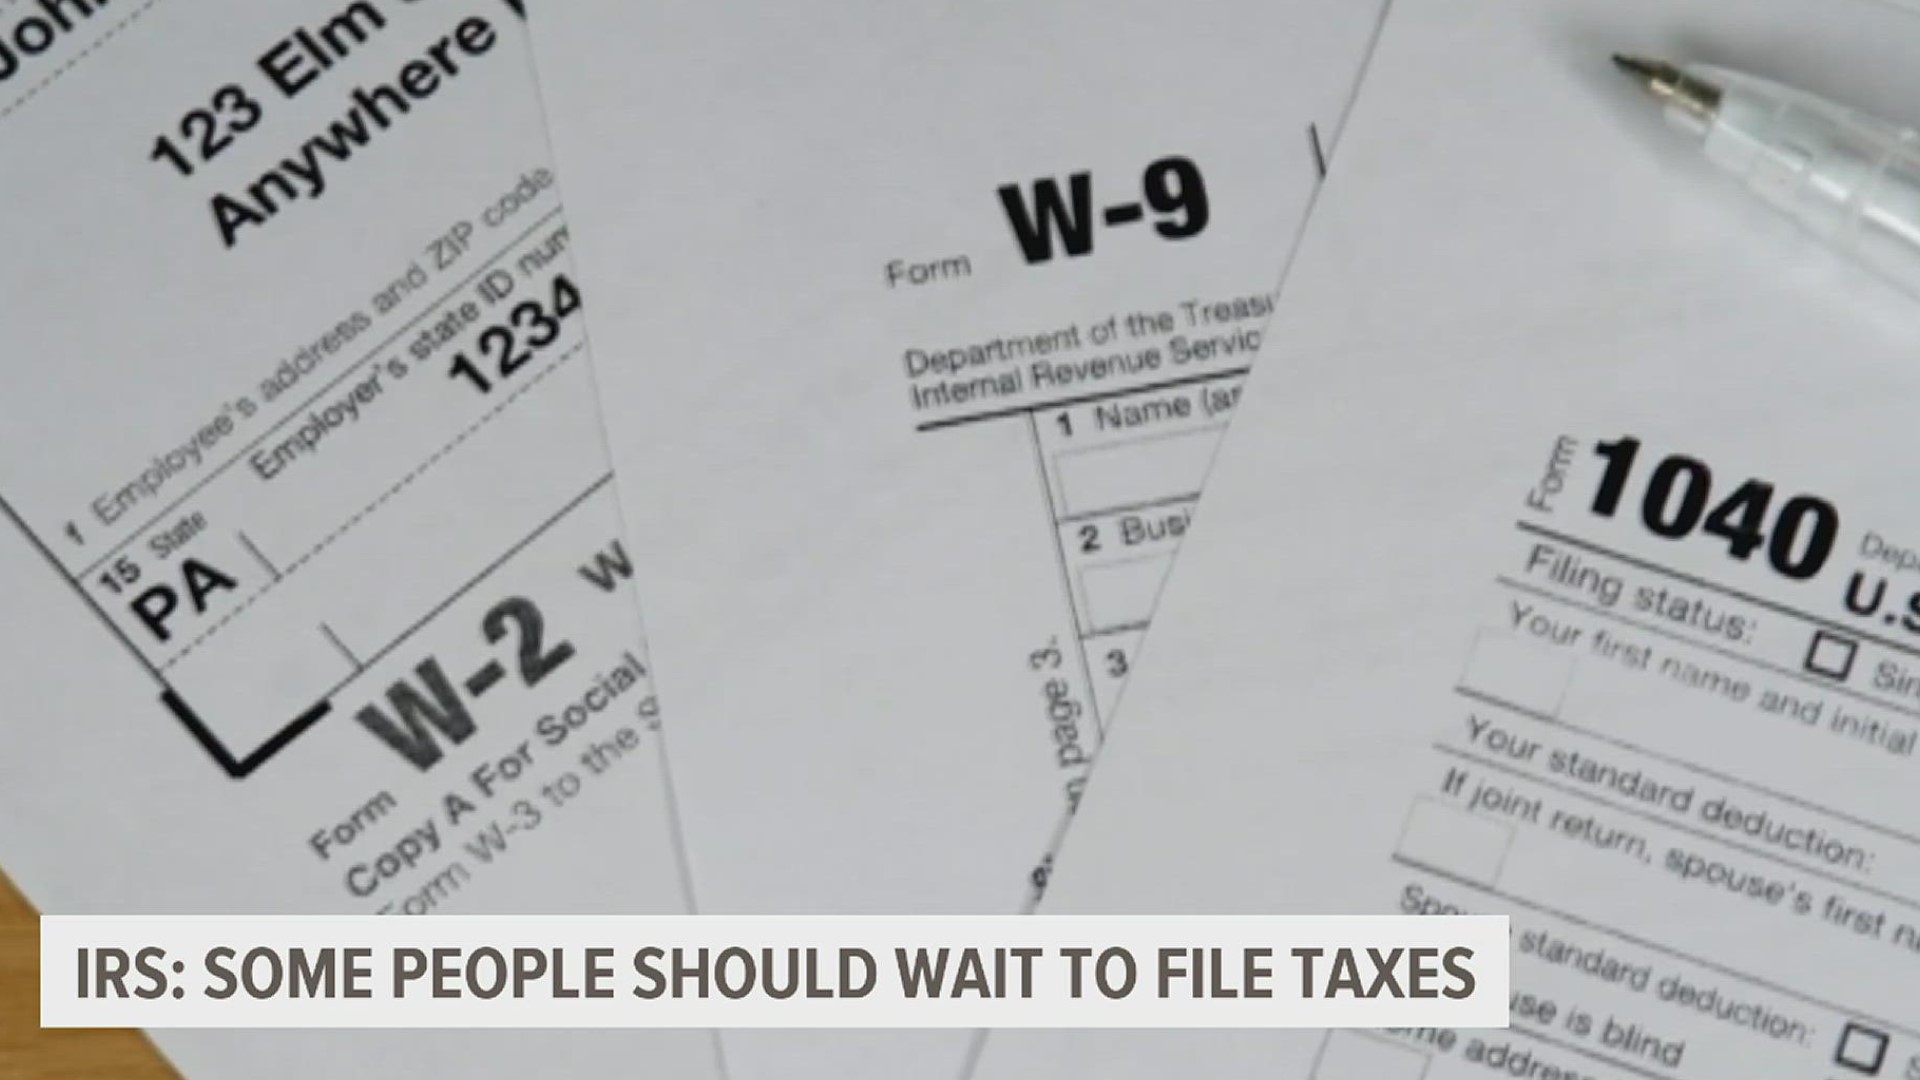 The Internal Revenue Service issued a statement on  Feb. 3 telling some people to hold off on filing taxes.